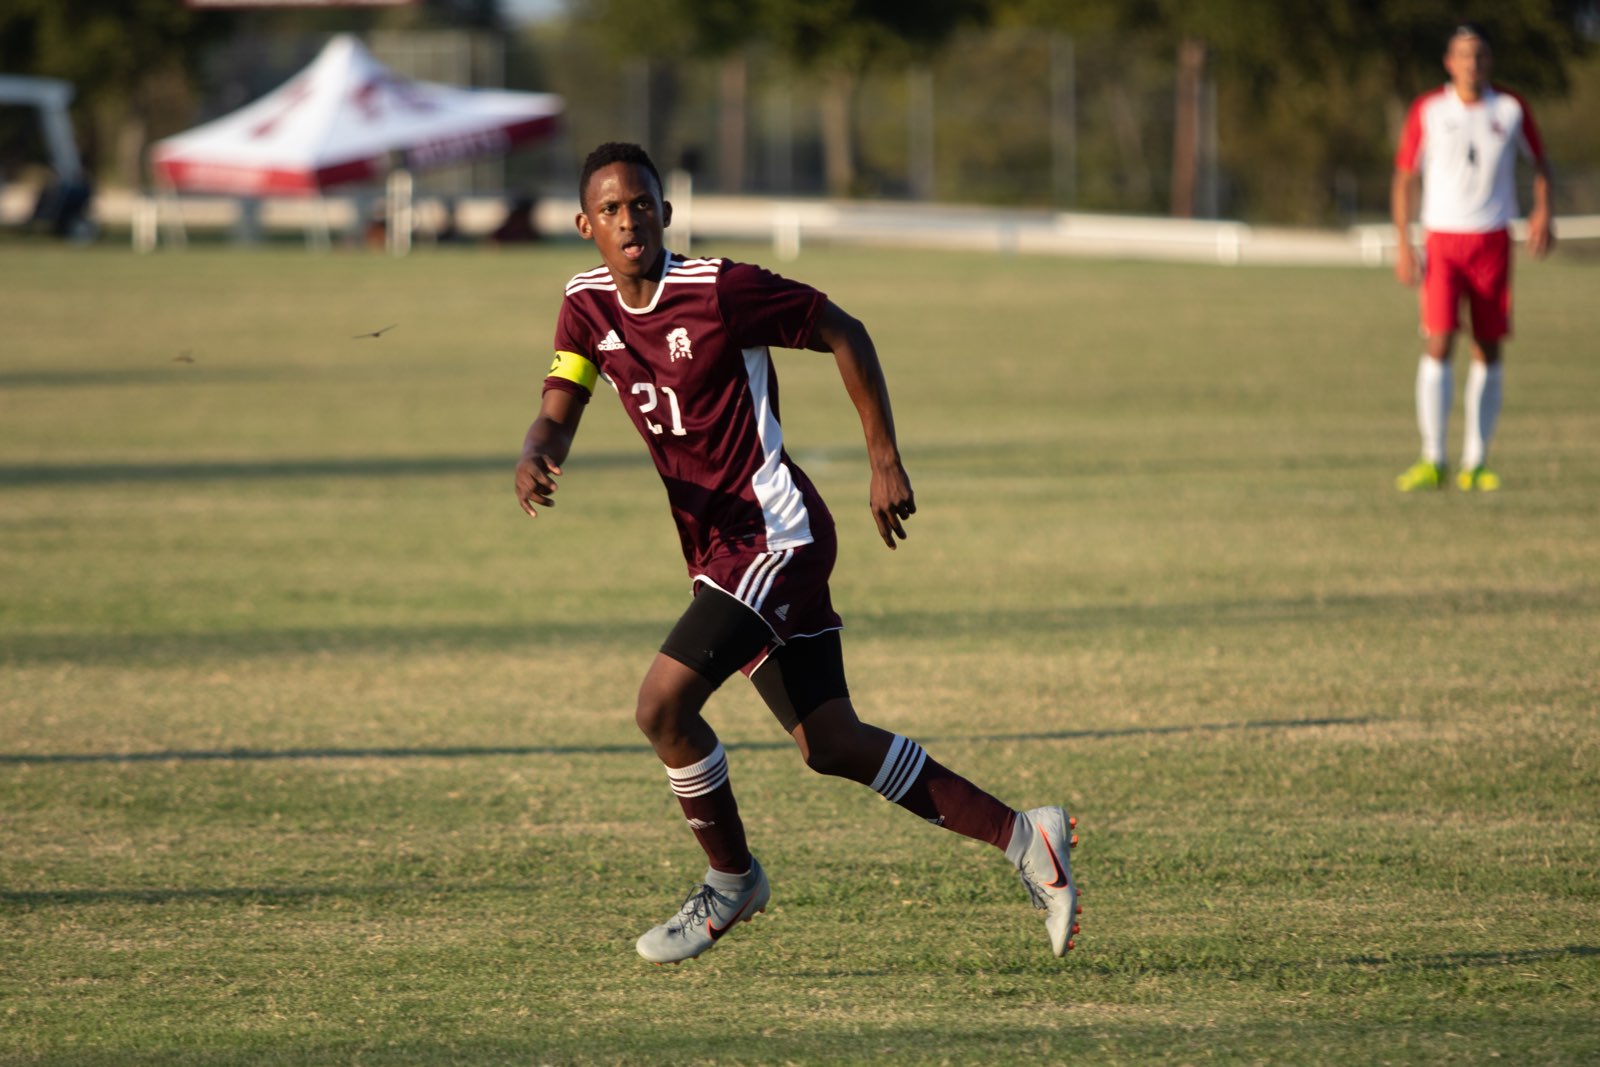 A soccer player in unifrom runs acrross the field during a game and is very focused